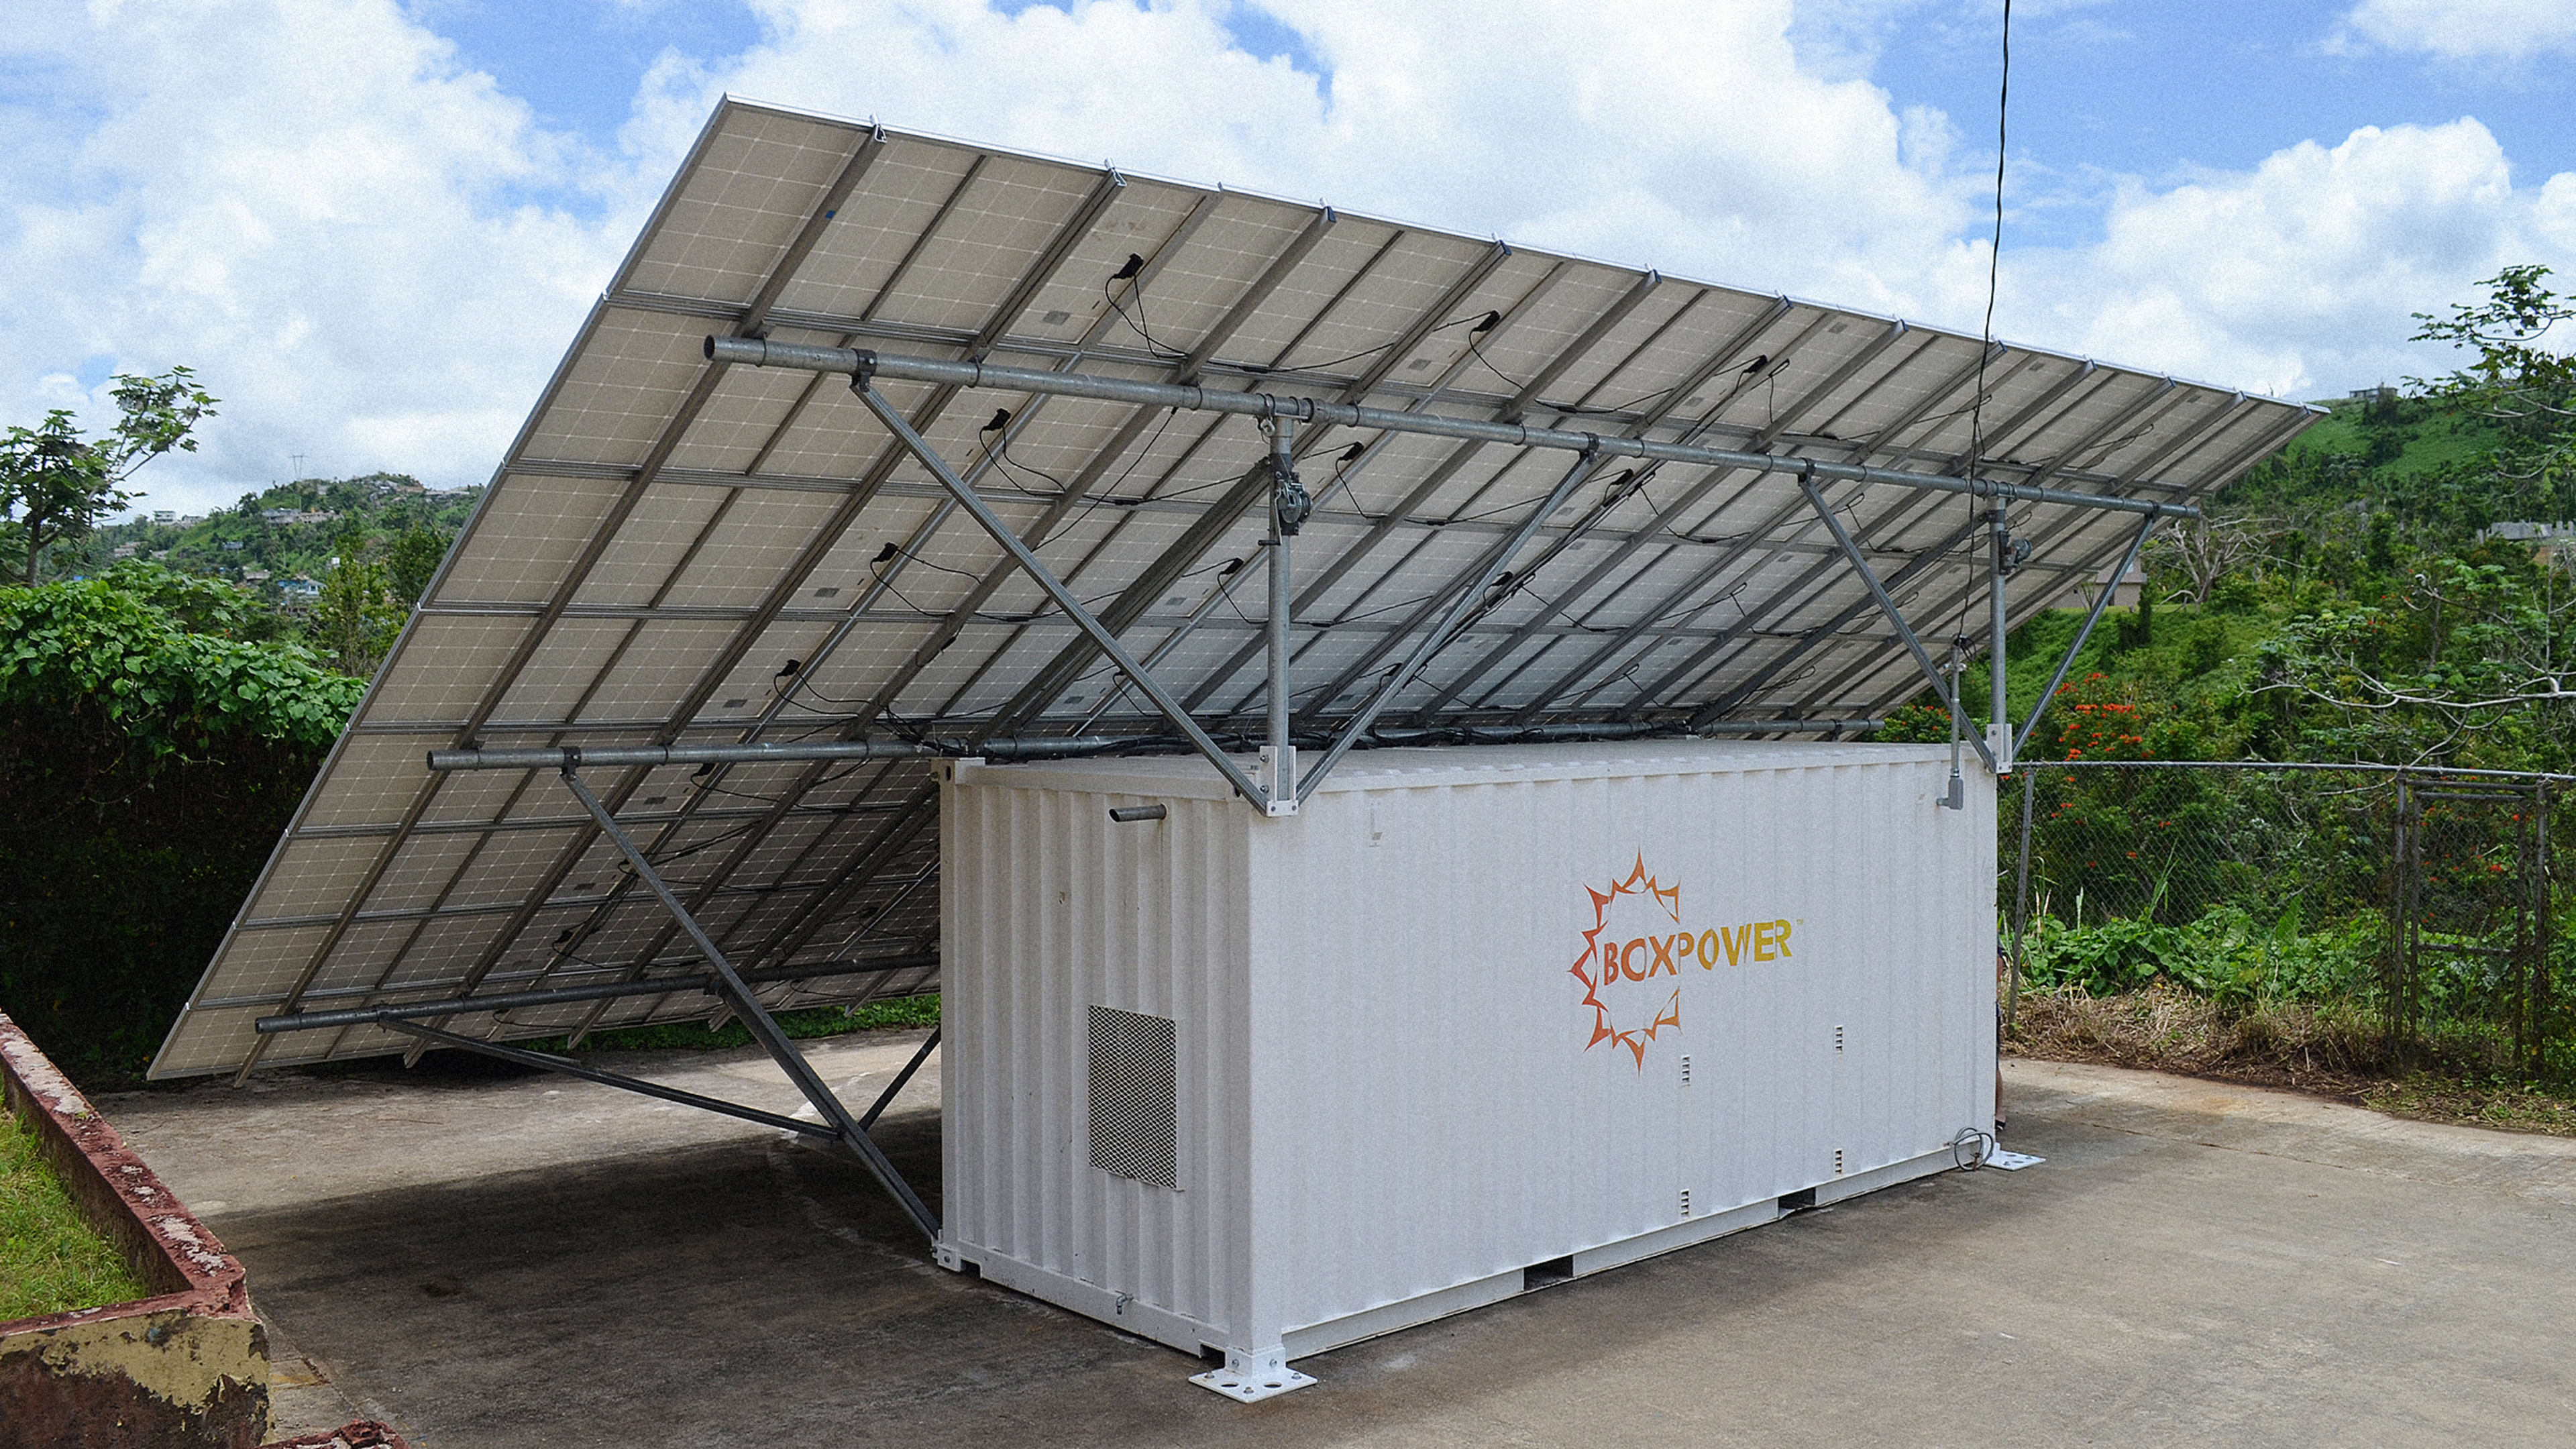 This single shipping container can start powering a small renewable grid in less than a day